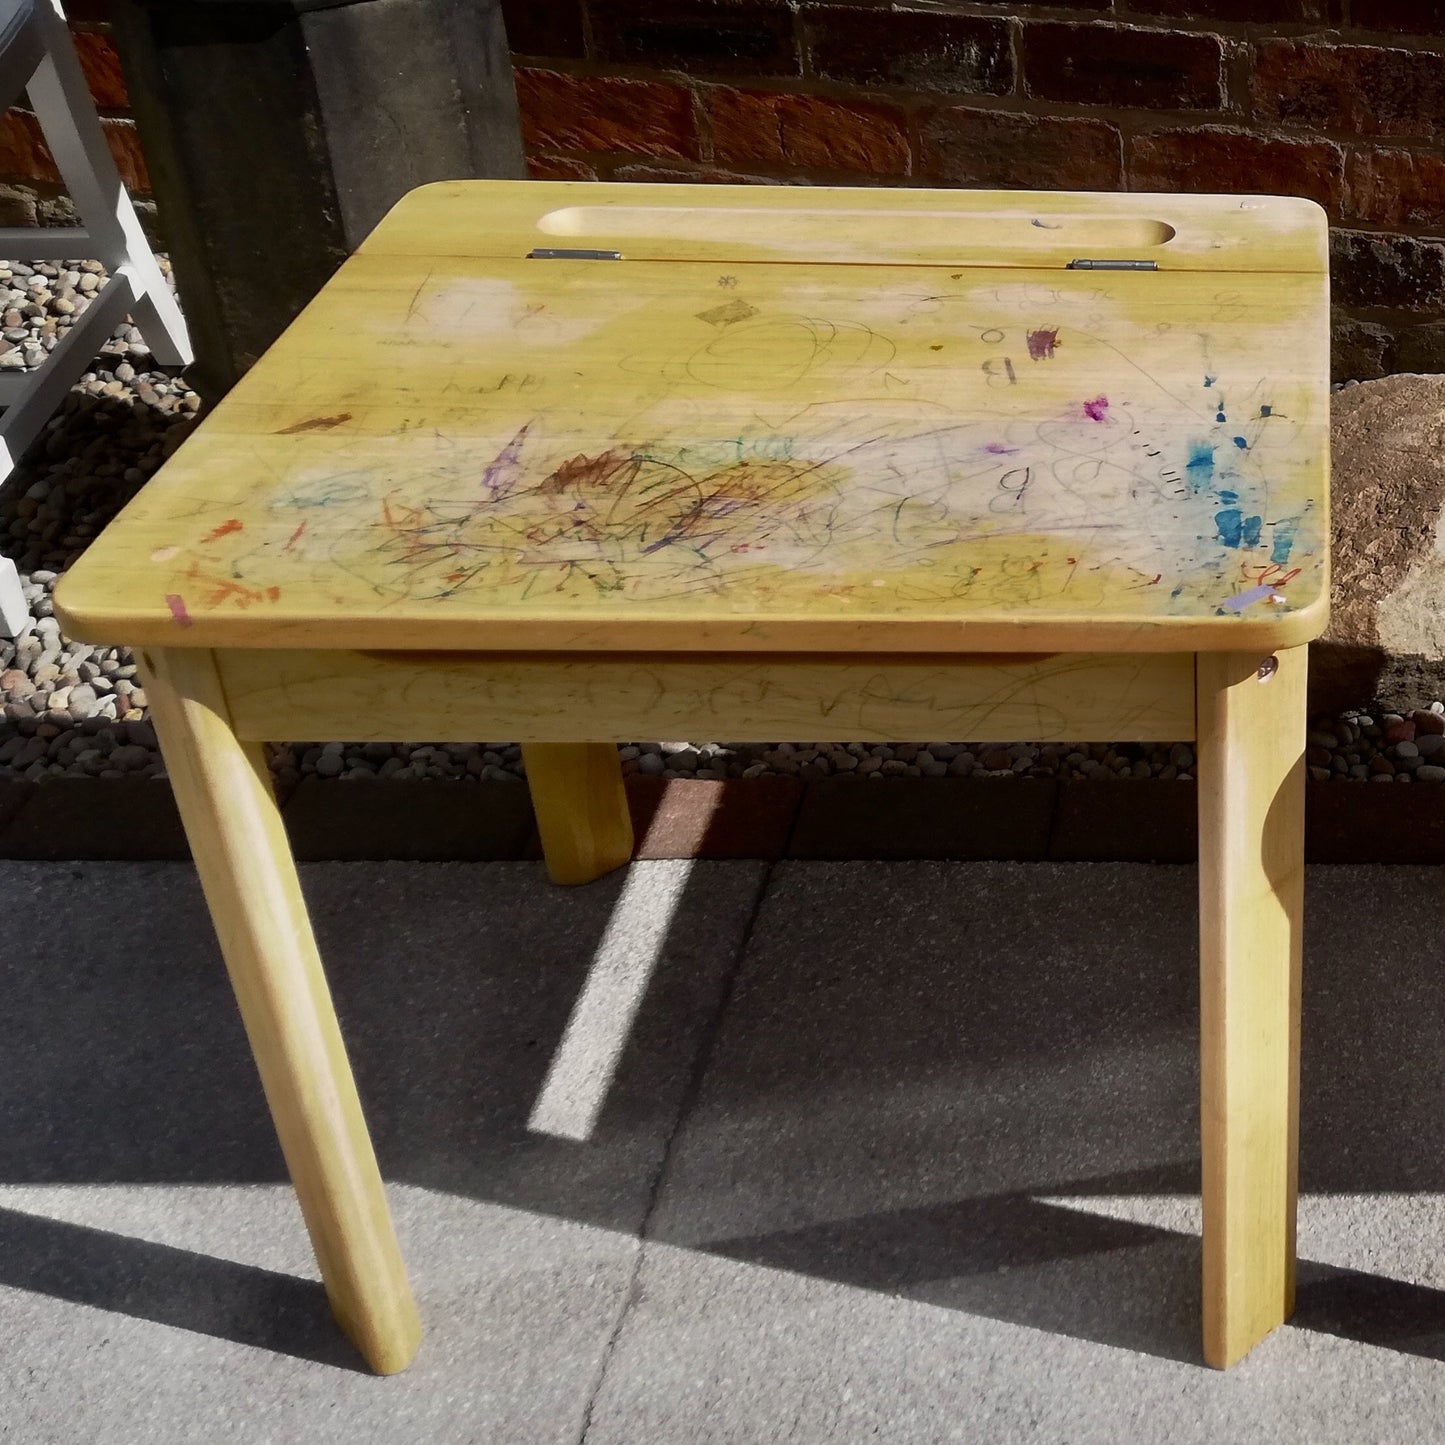 Modern children's desk - price includes painting